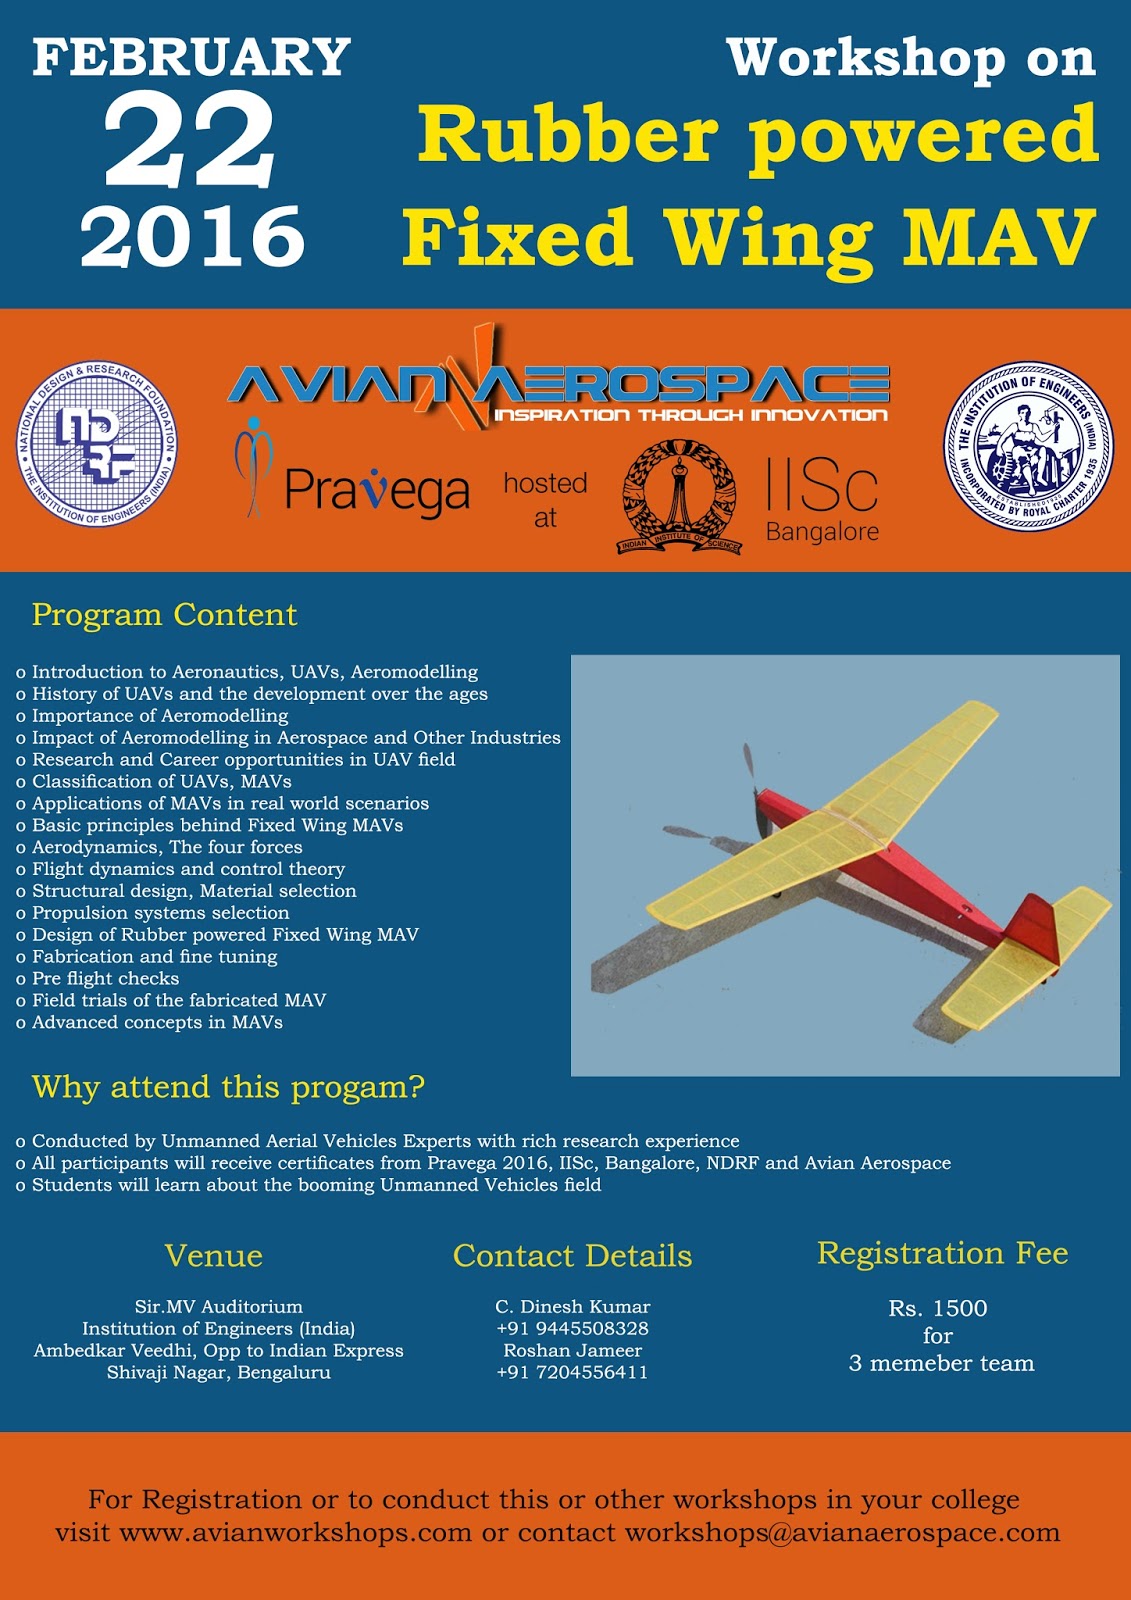 One day workshop on Rubber Powered Micro Airplane (Fixed Wing MAV)